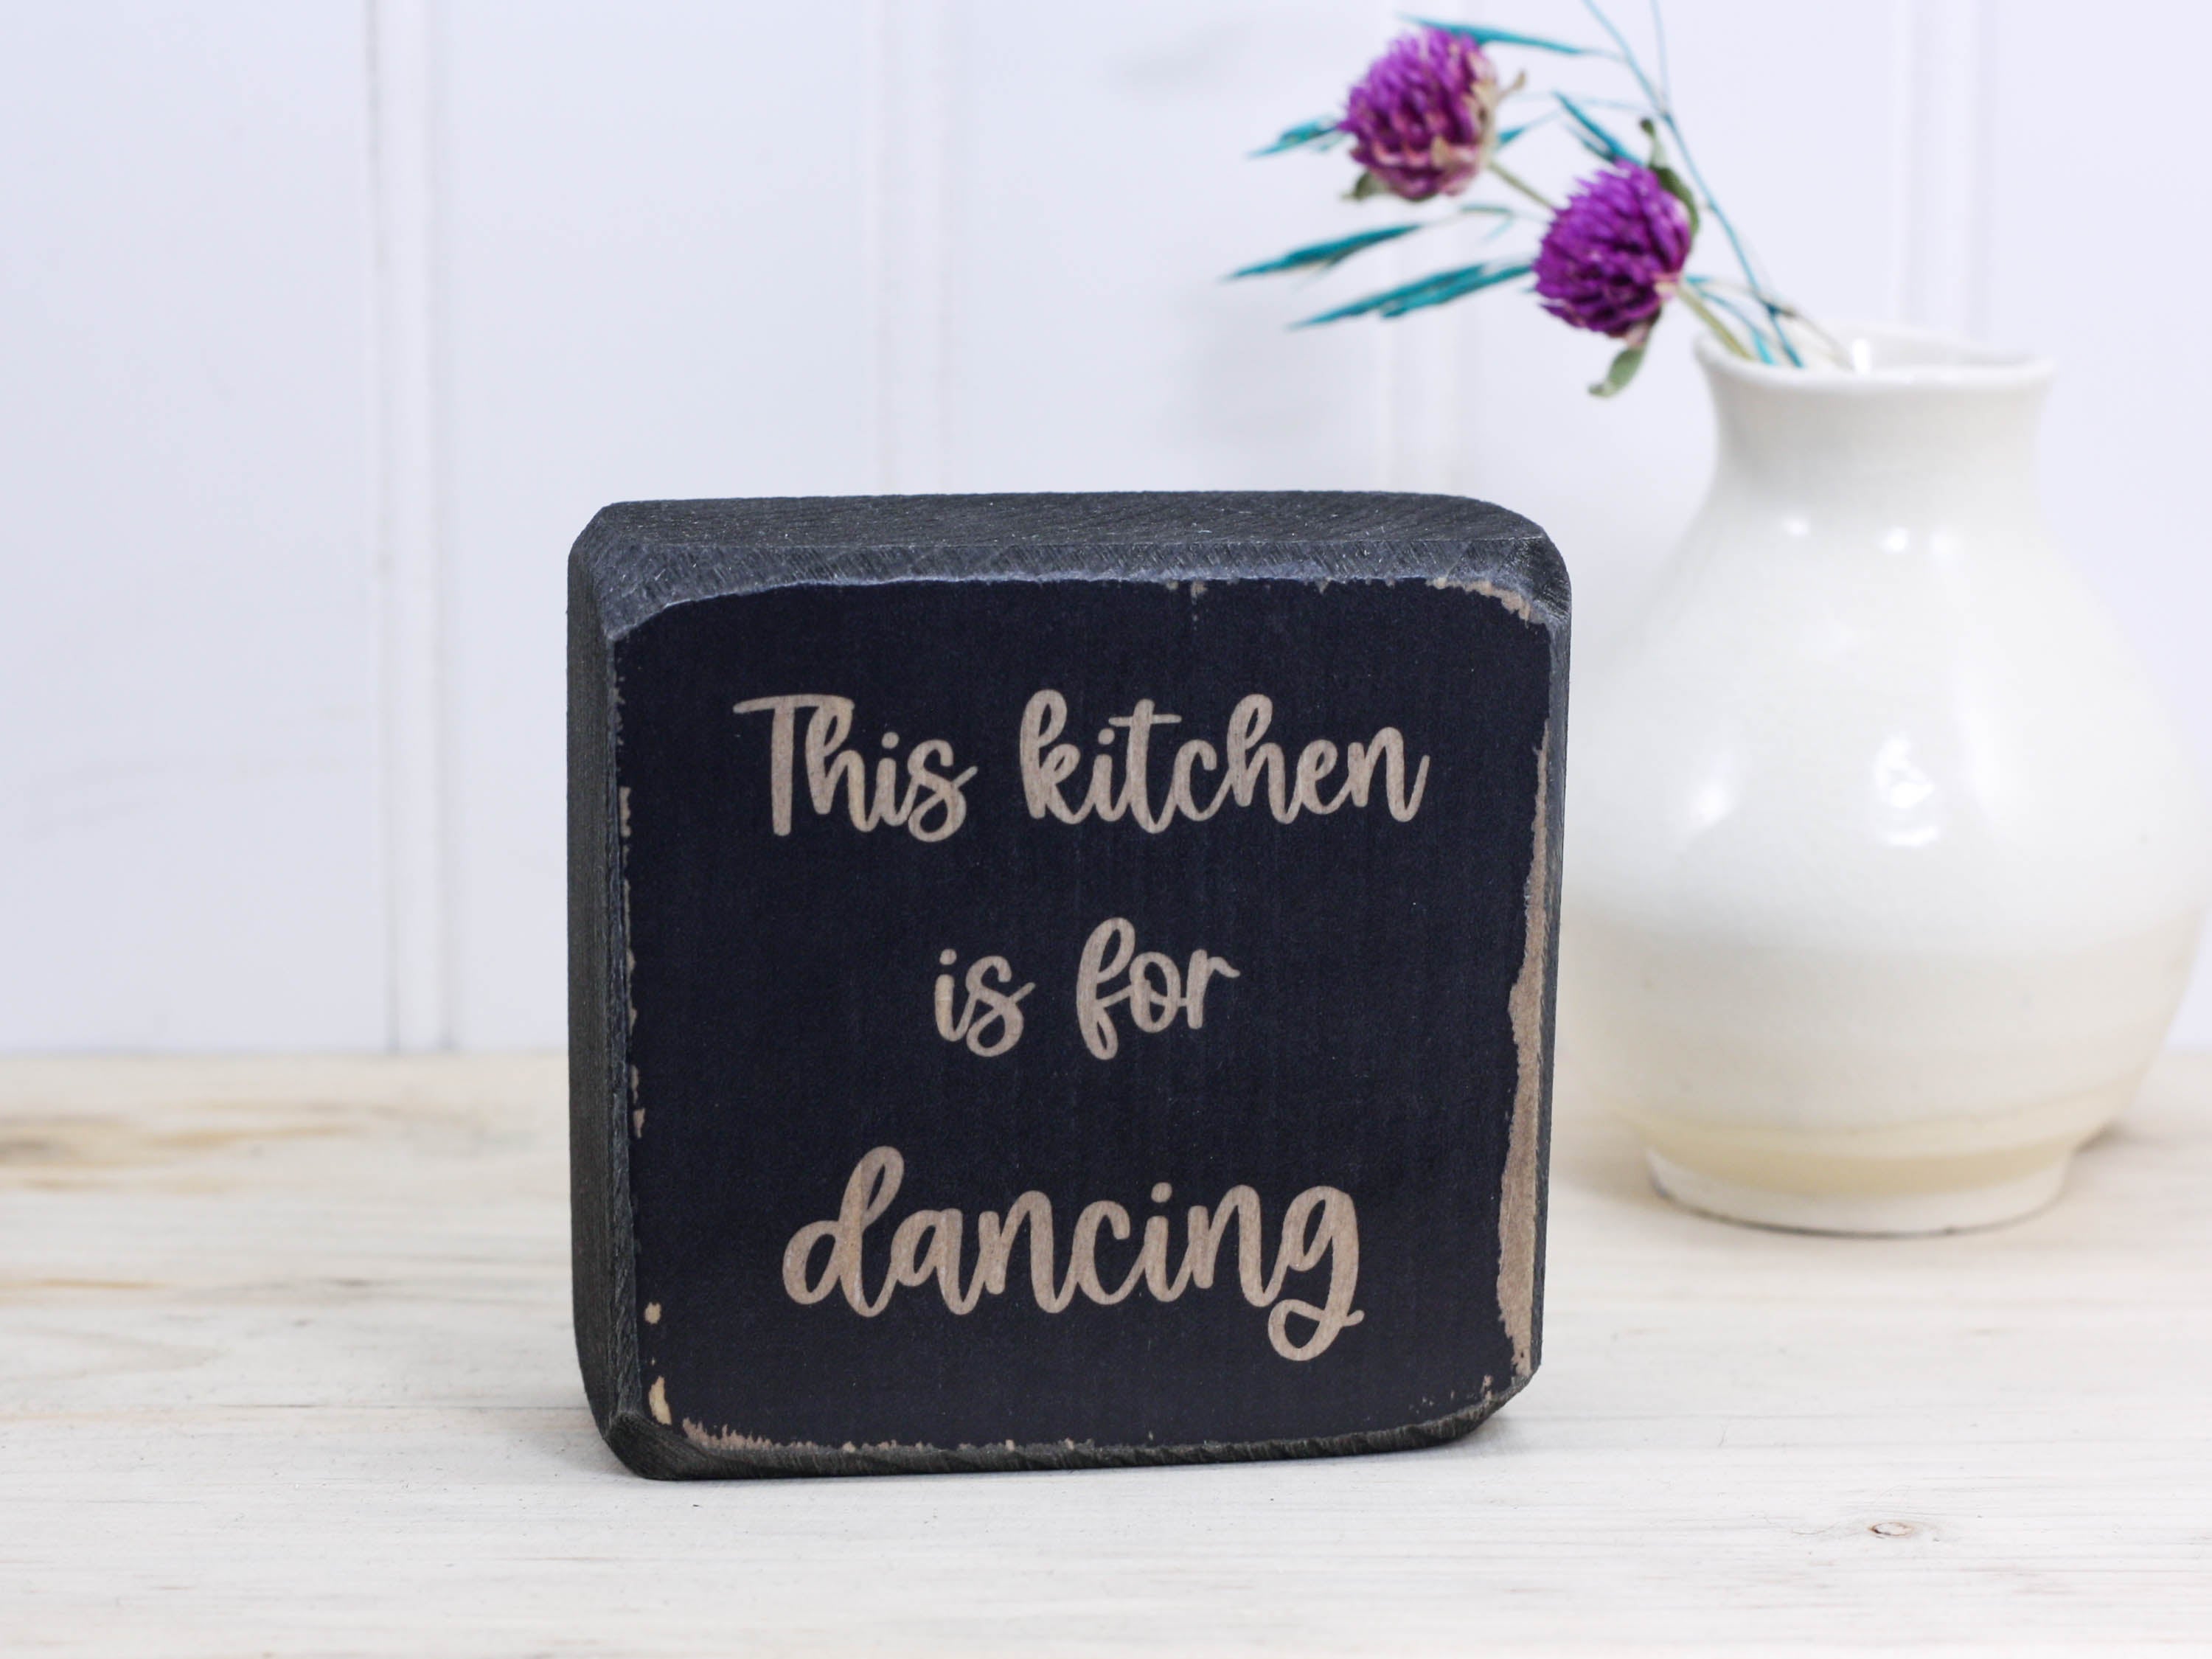 Small wooden decor in distressed black with the saying "This kitchen is for dancing".